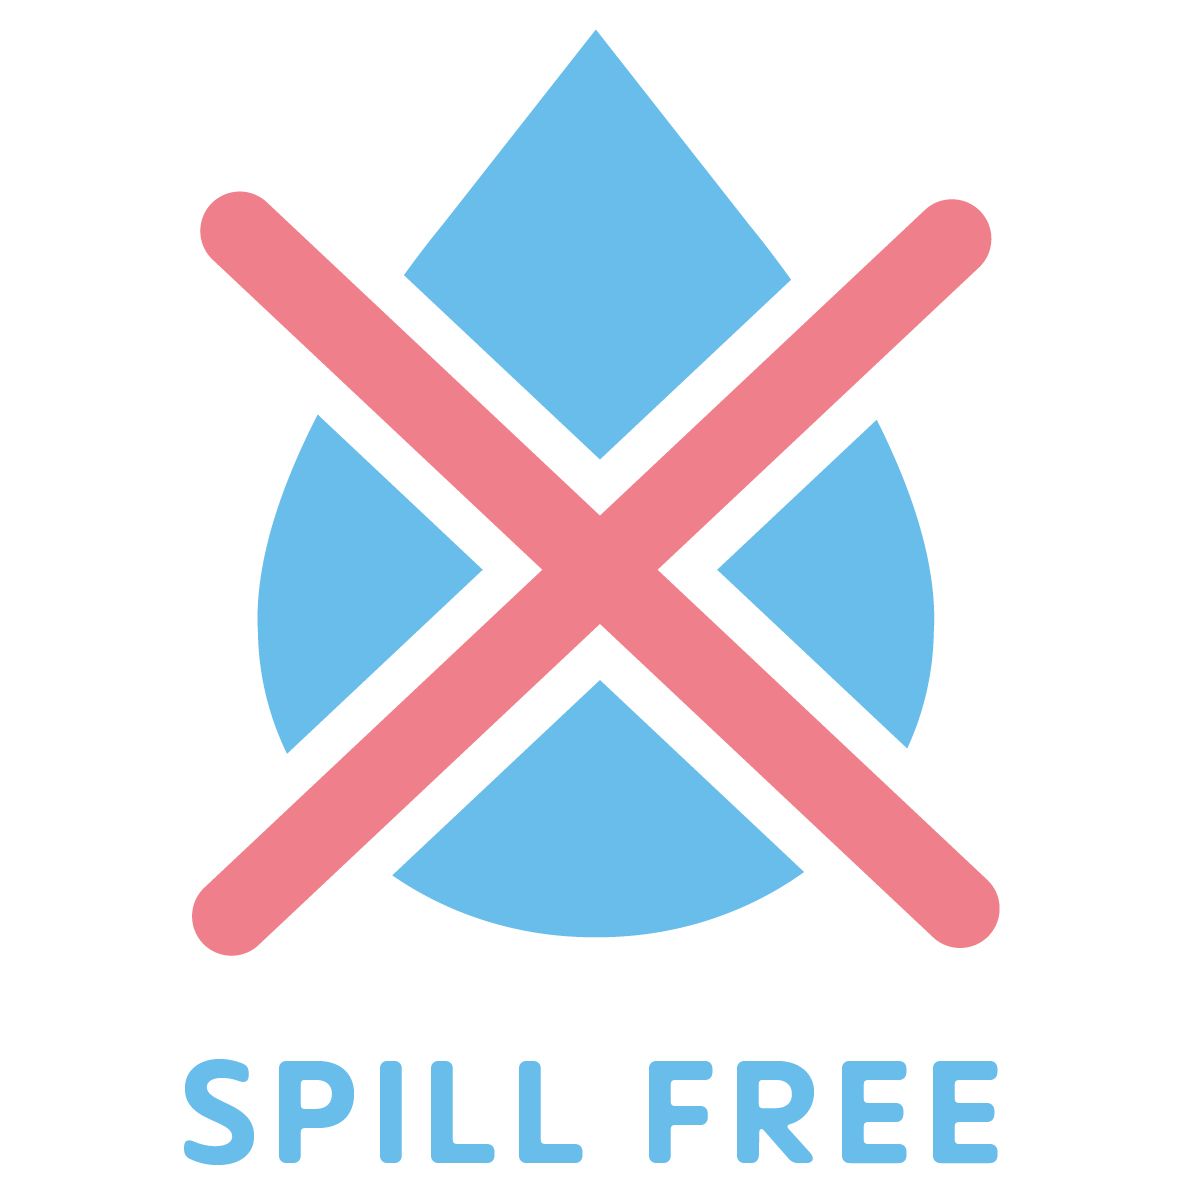 Spill-free - for a first independent feeding